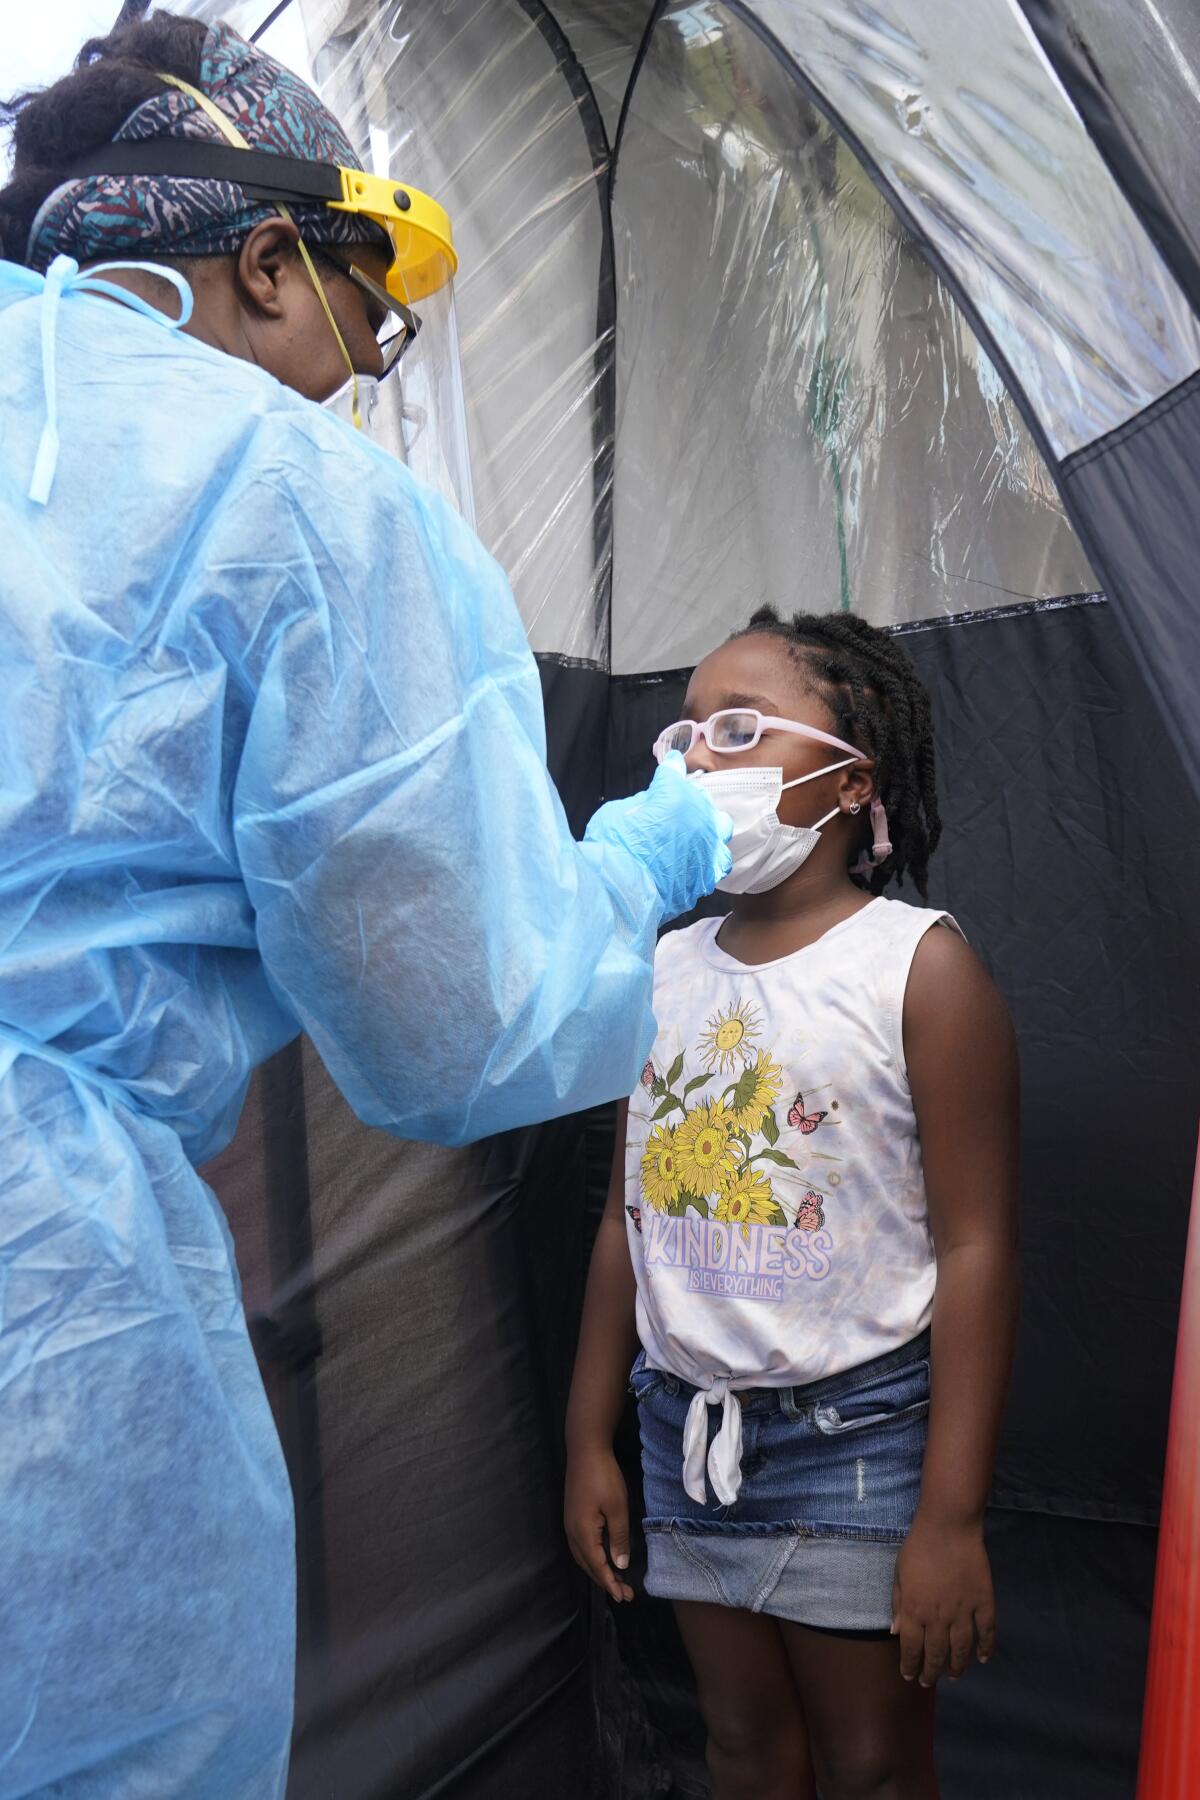 Juliani Pierre, 7, is tested for COVID-19, Tuesday, Aug. 31, 2021, in North Miami, Fla. Florida schools are seeing a rise in COVID-19 cases forcing teachers and students to quarantine. (AP Photo/Marta Lavandier)